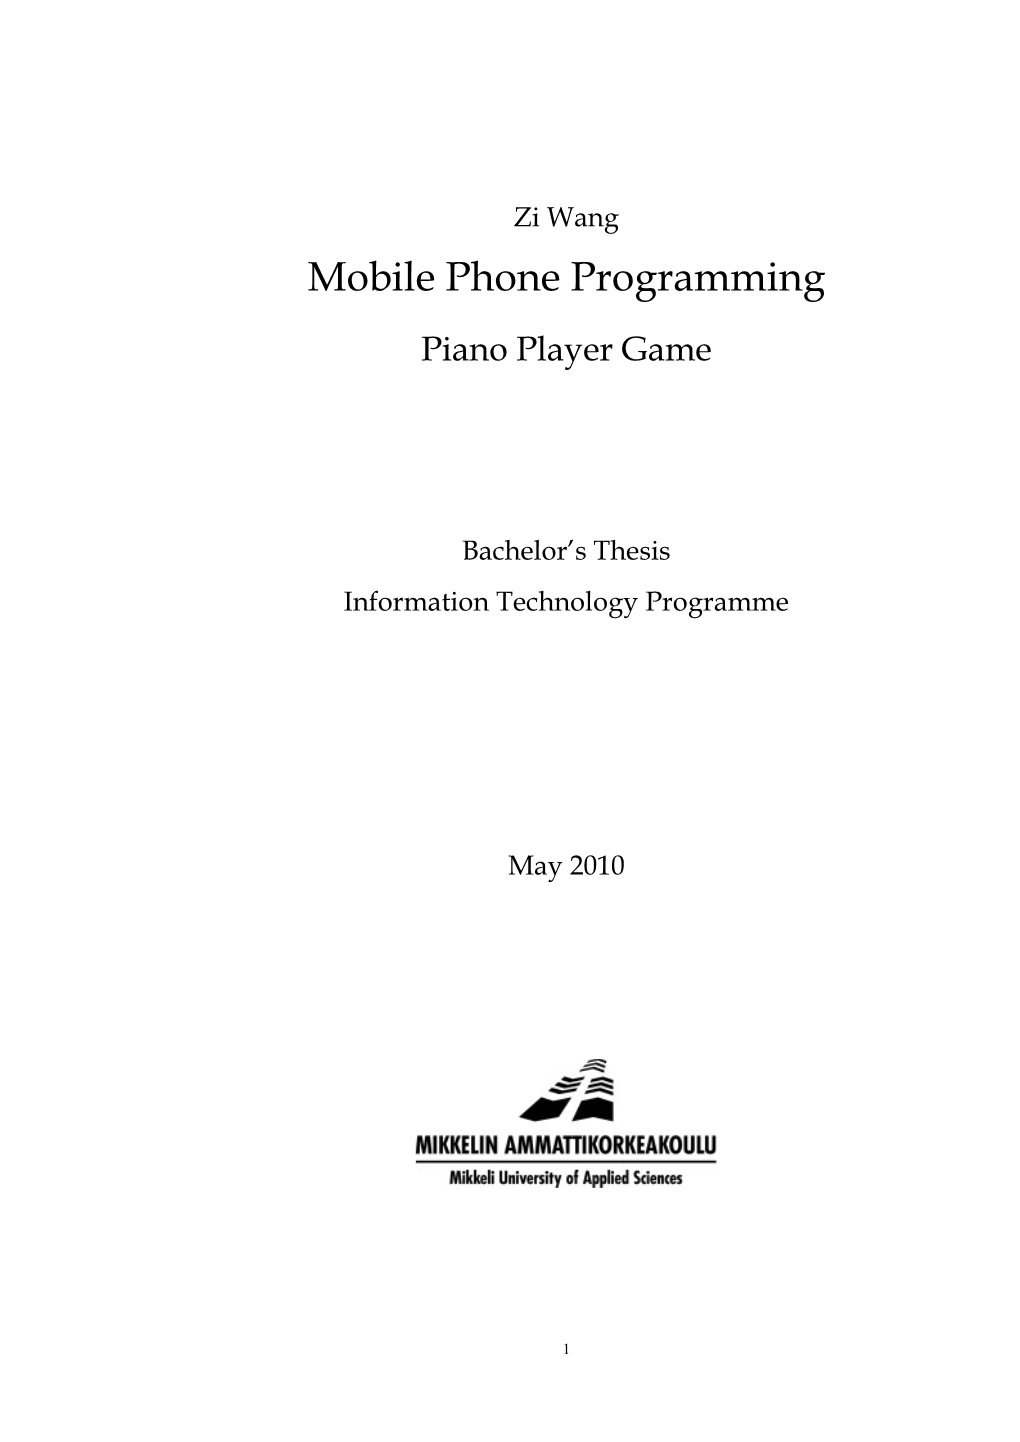 Mobile Phone Programming Piano Player Game